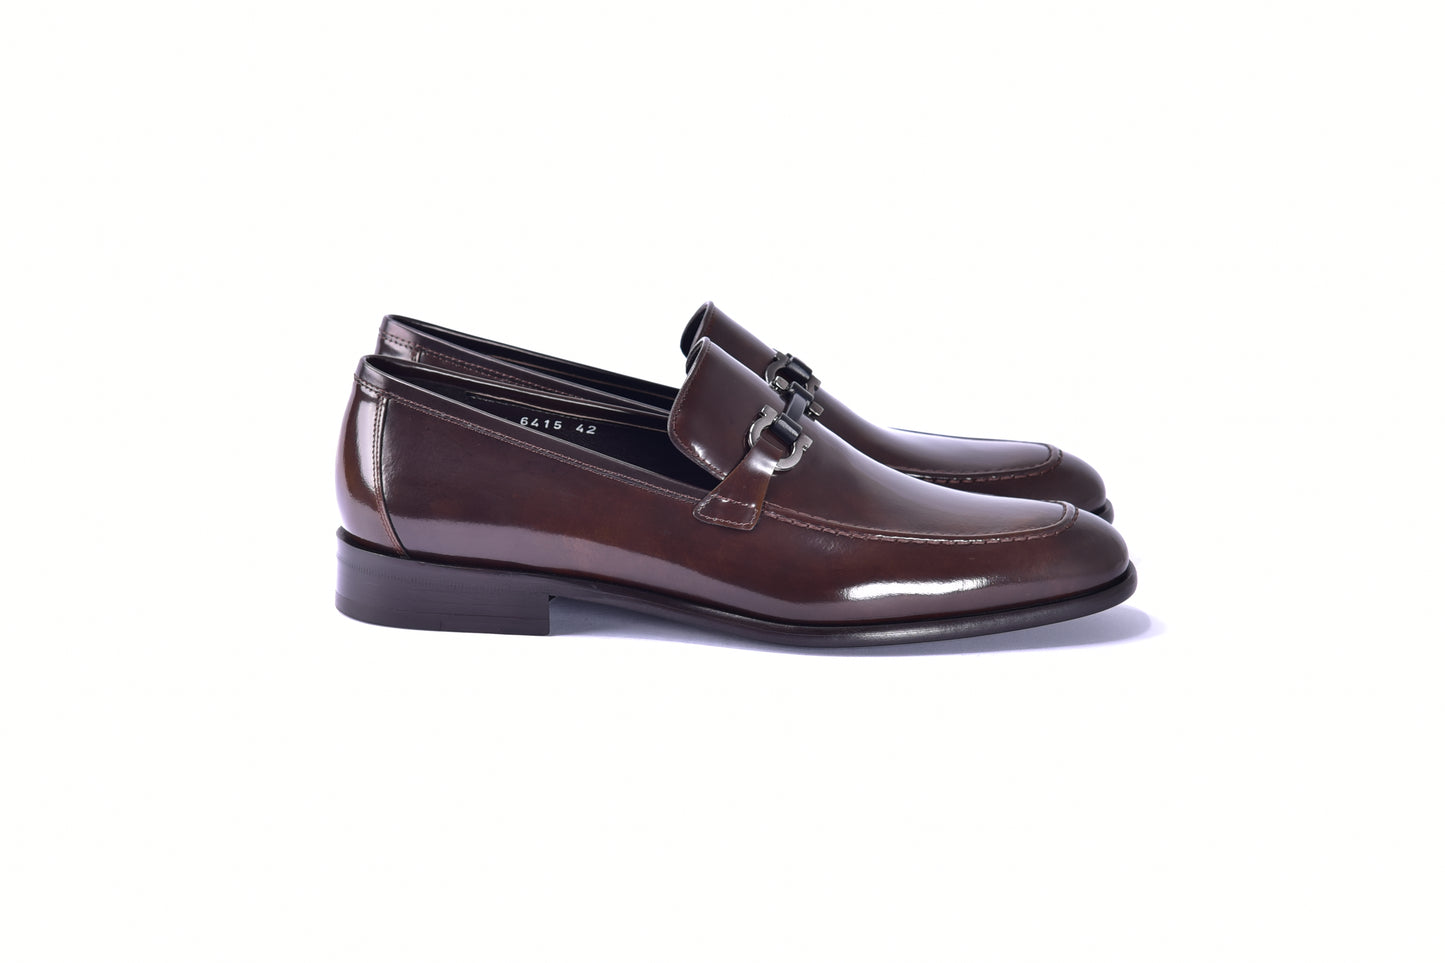 C0432-6415 Lux Calf Buckle Loafer- Brown